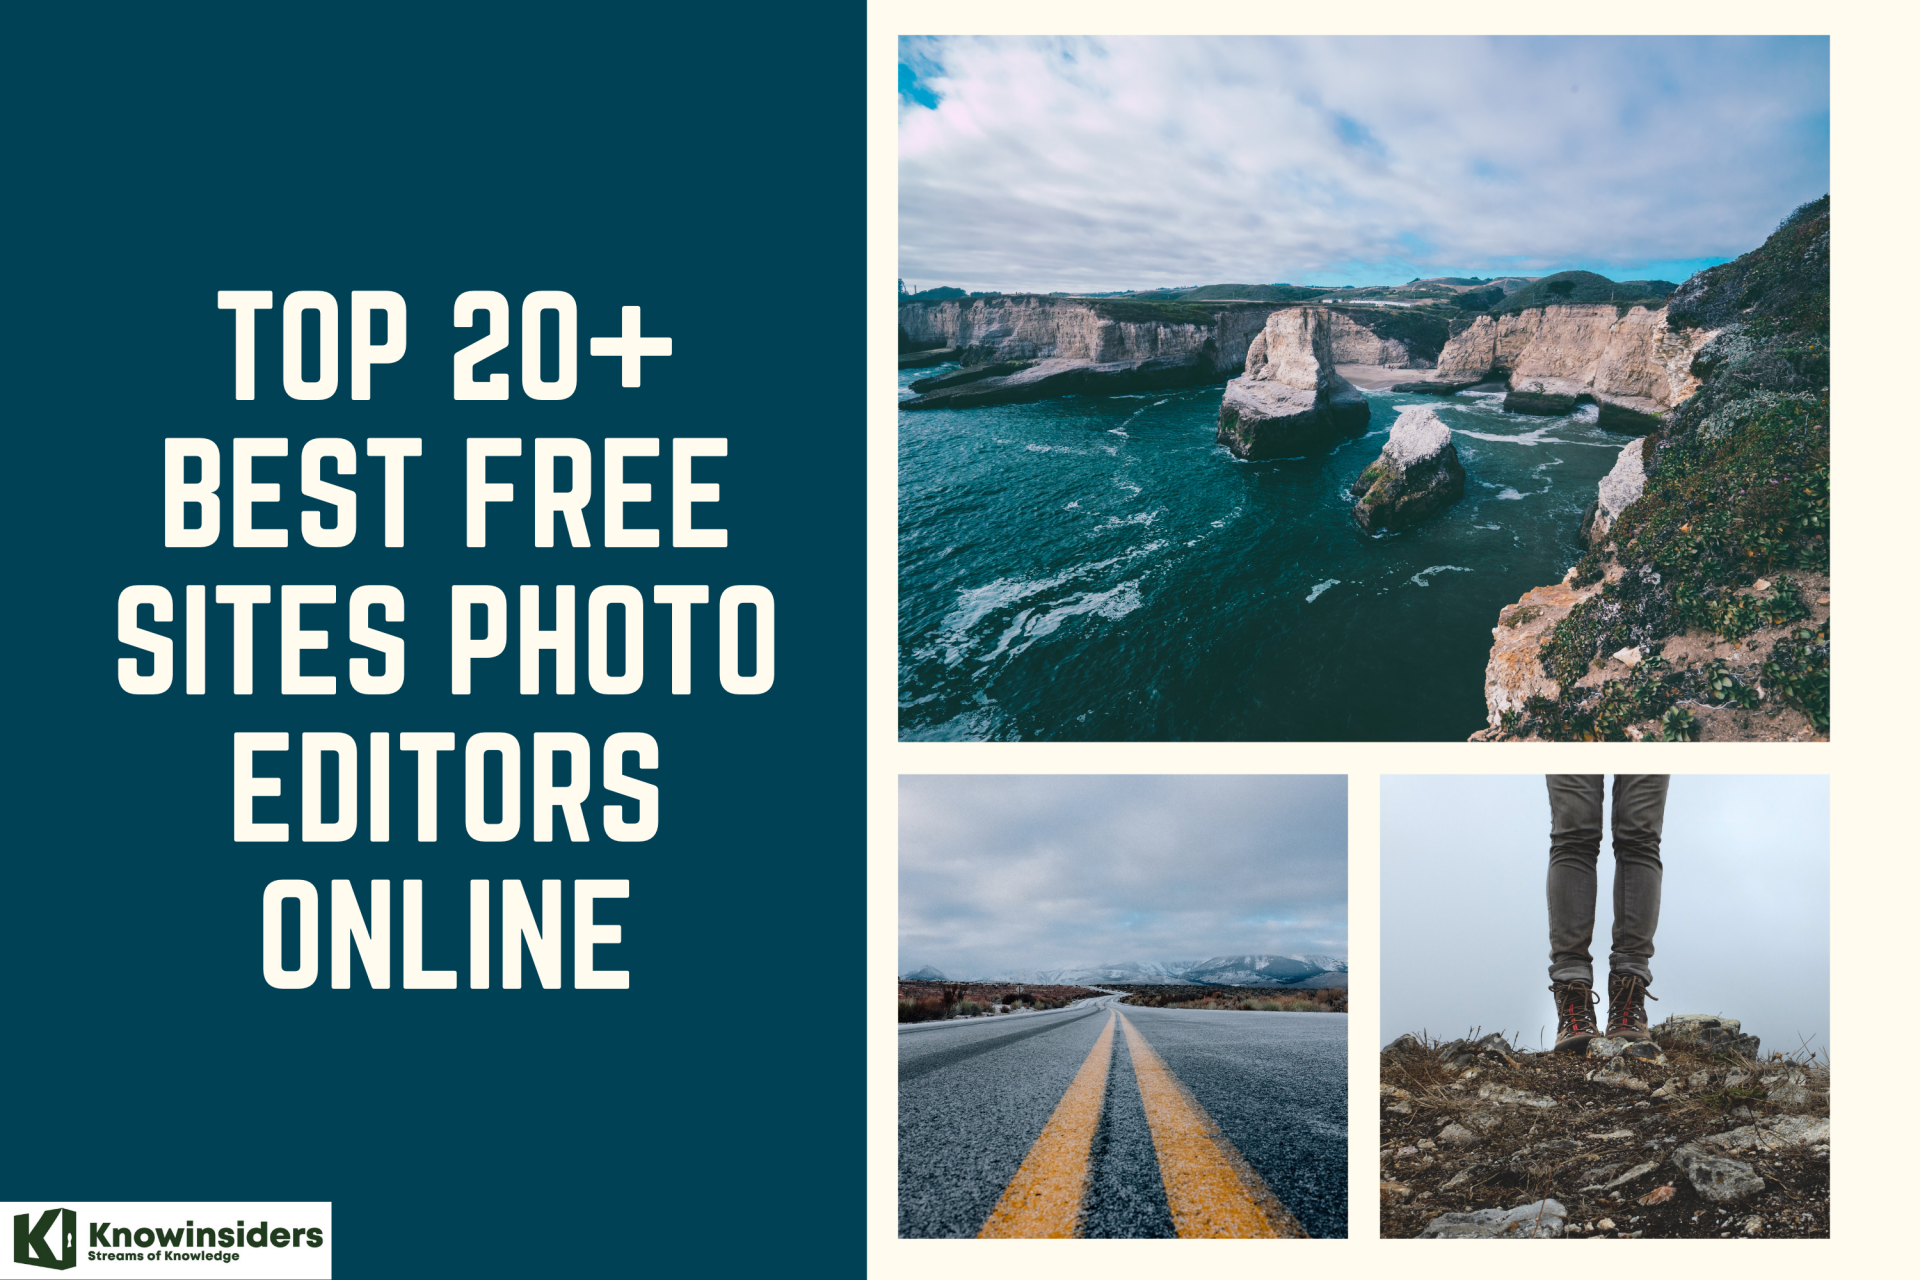 Top 20+ Best Free Sites for Photo Editors Online